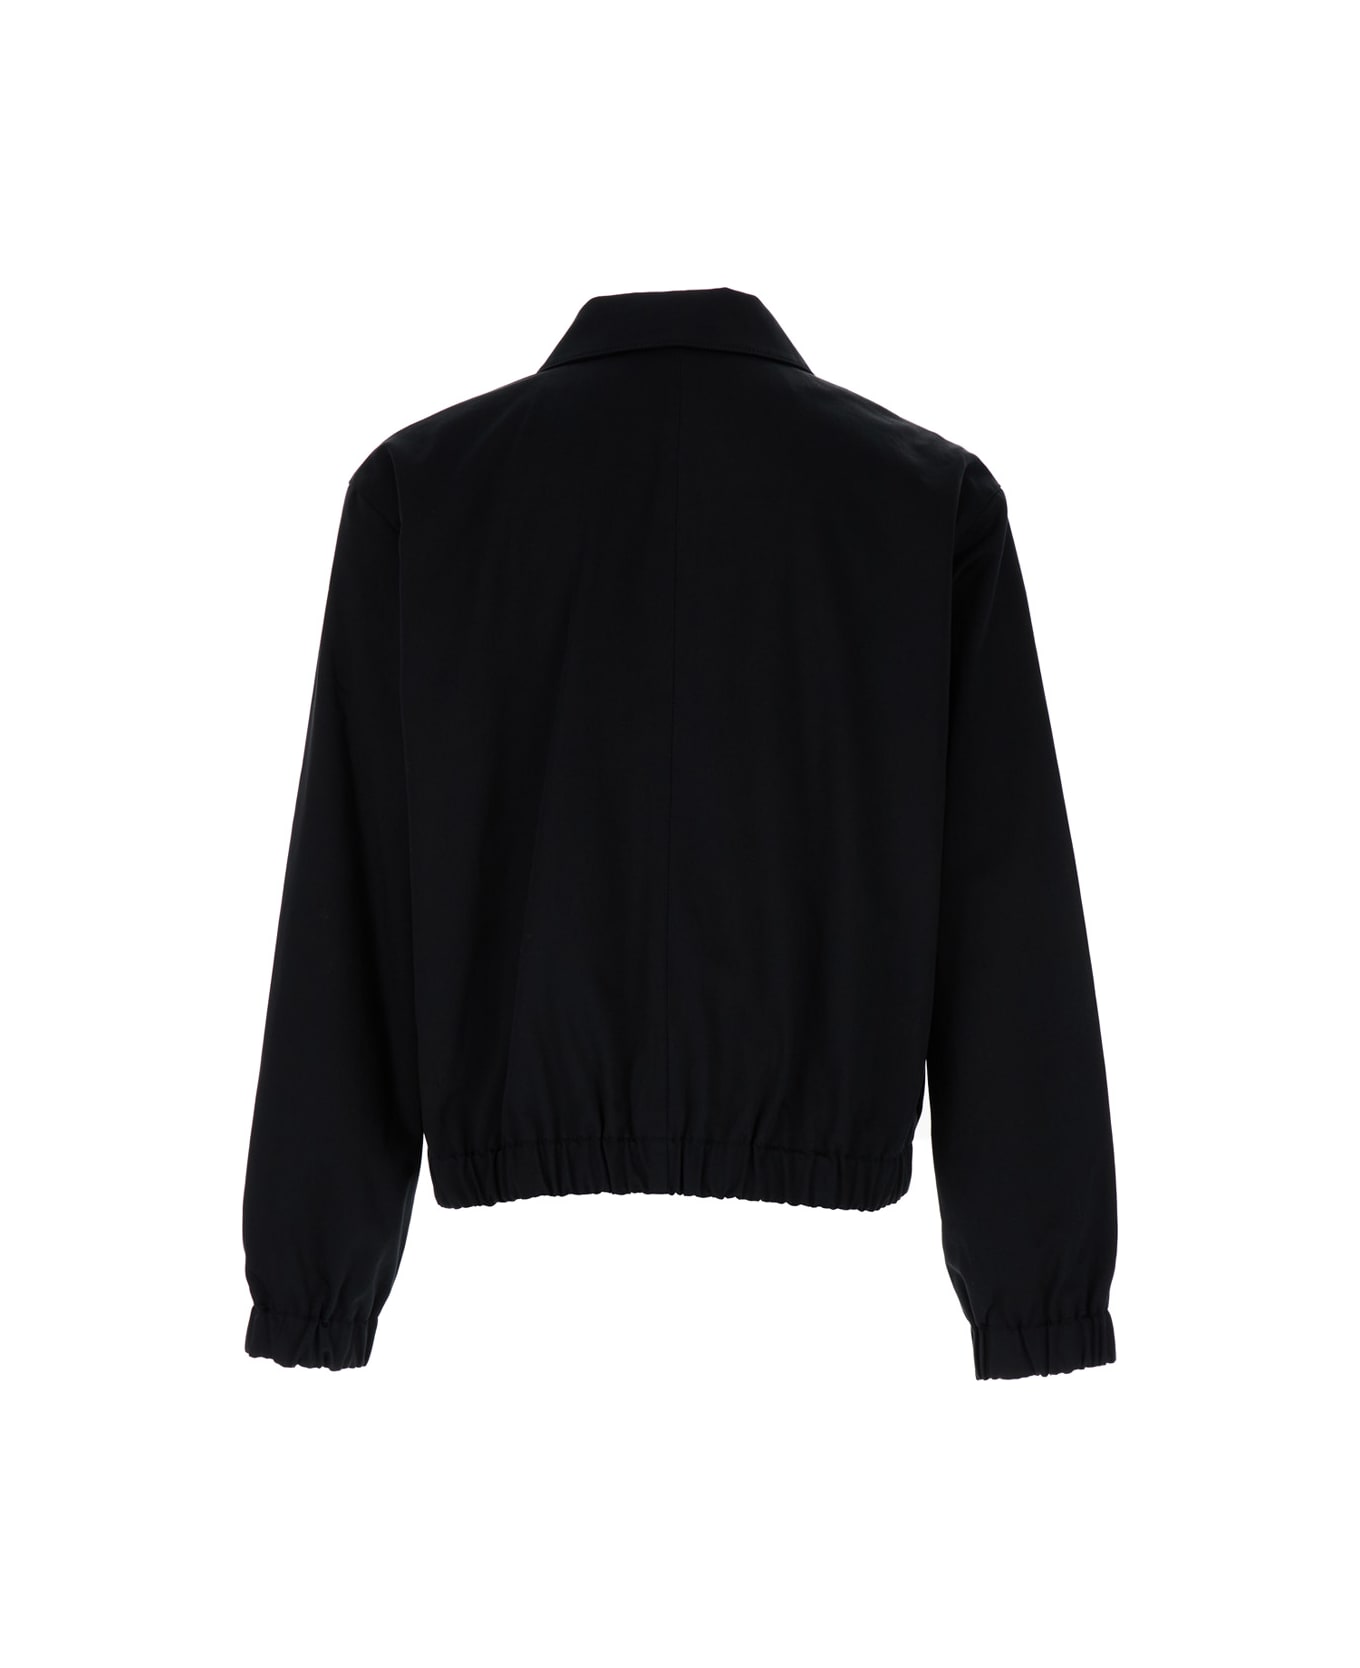 Ami Alexandre Mattiussi Black Jacket With Collar And Adc Logo In Cotton Man - Black